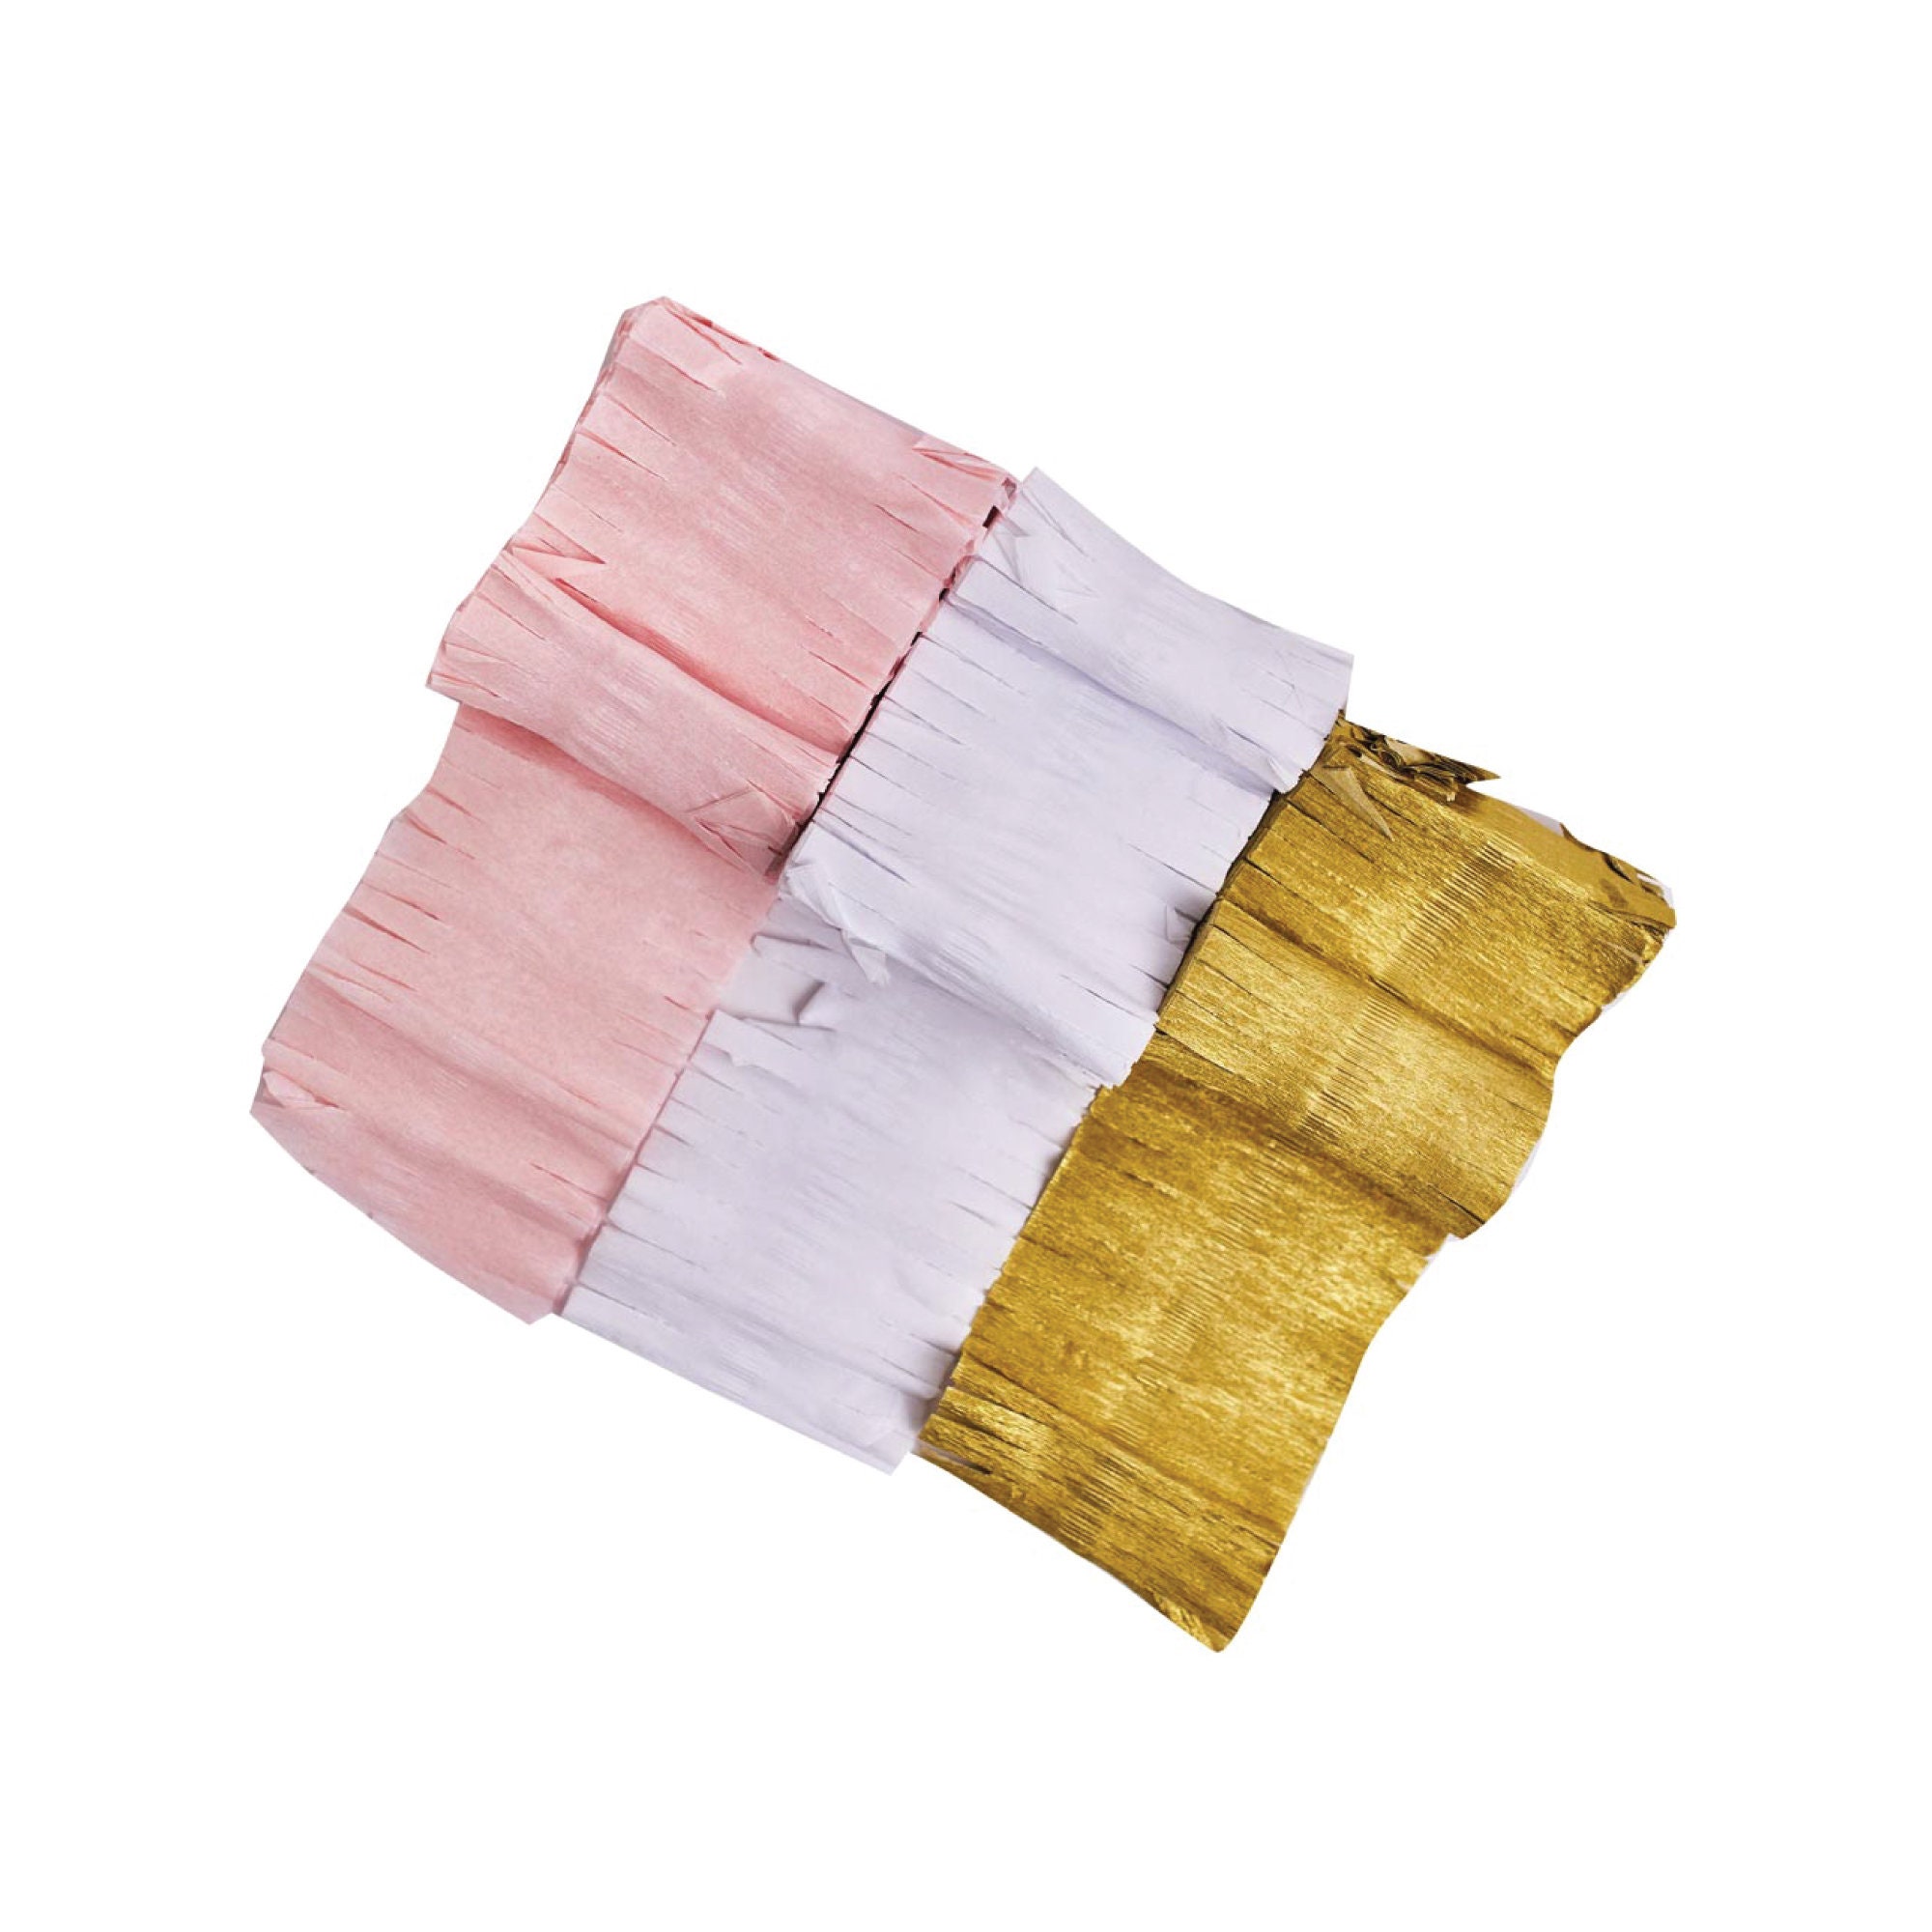 Crepe Paper Streamers 3 Rolls 32ft in 3 Colors (Pink/White/Gold Tone)